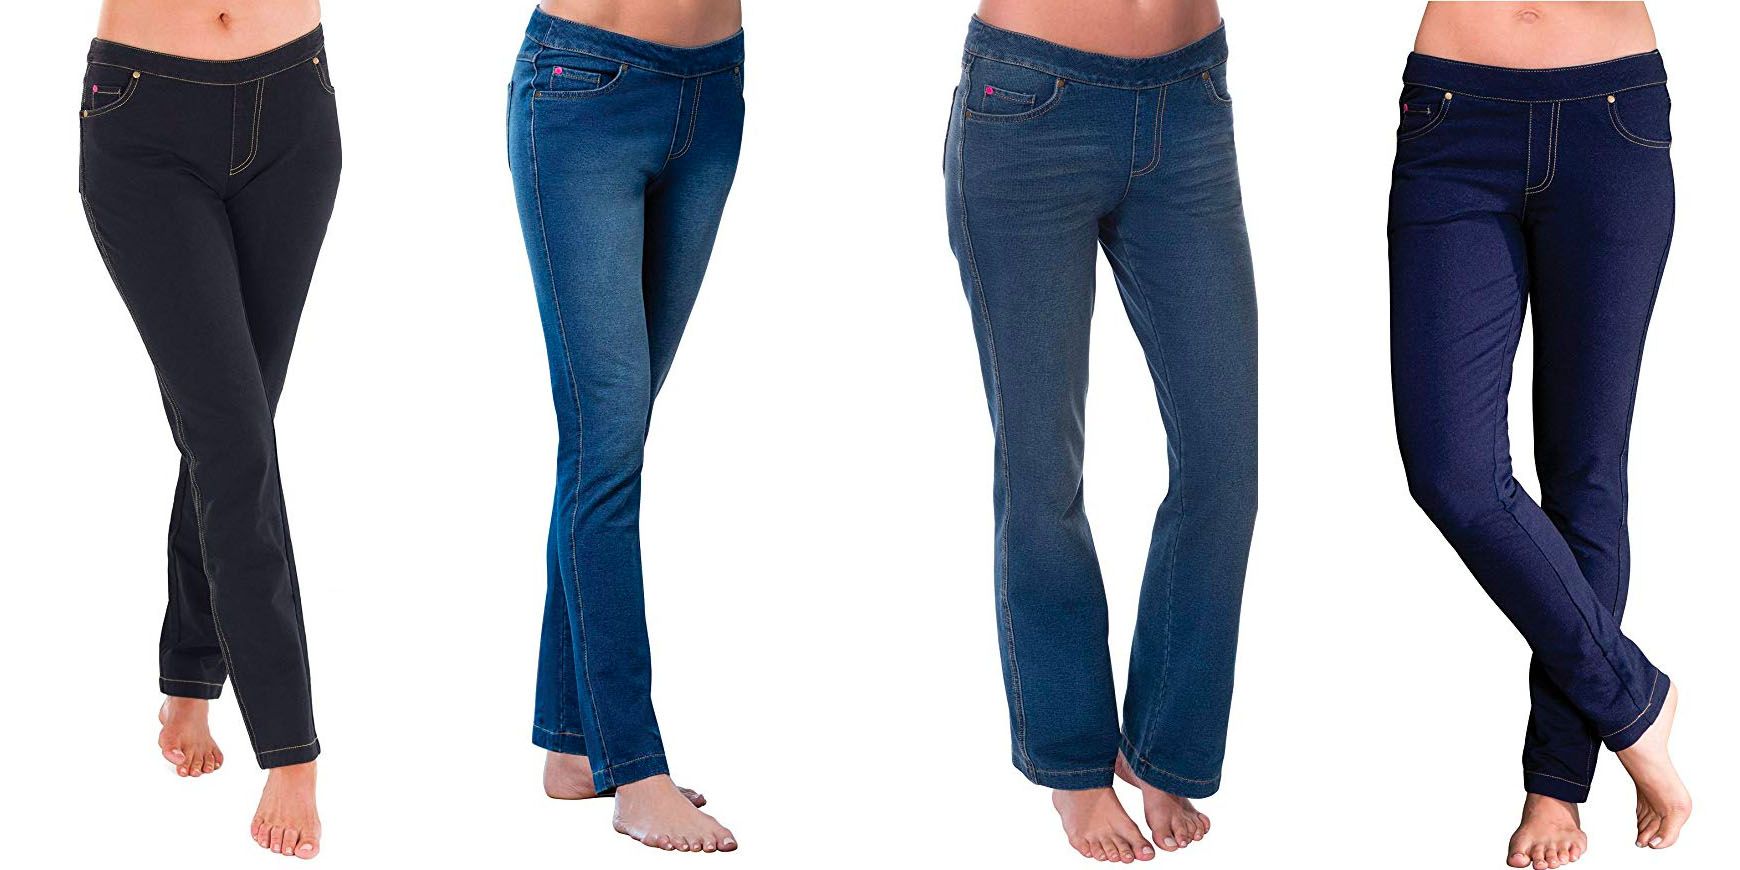 PajamaJeans are comfortable & now on sale at Amazon from $19 shipped ...